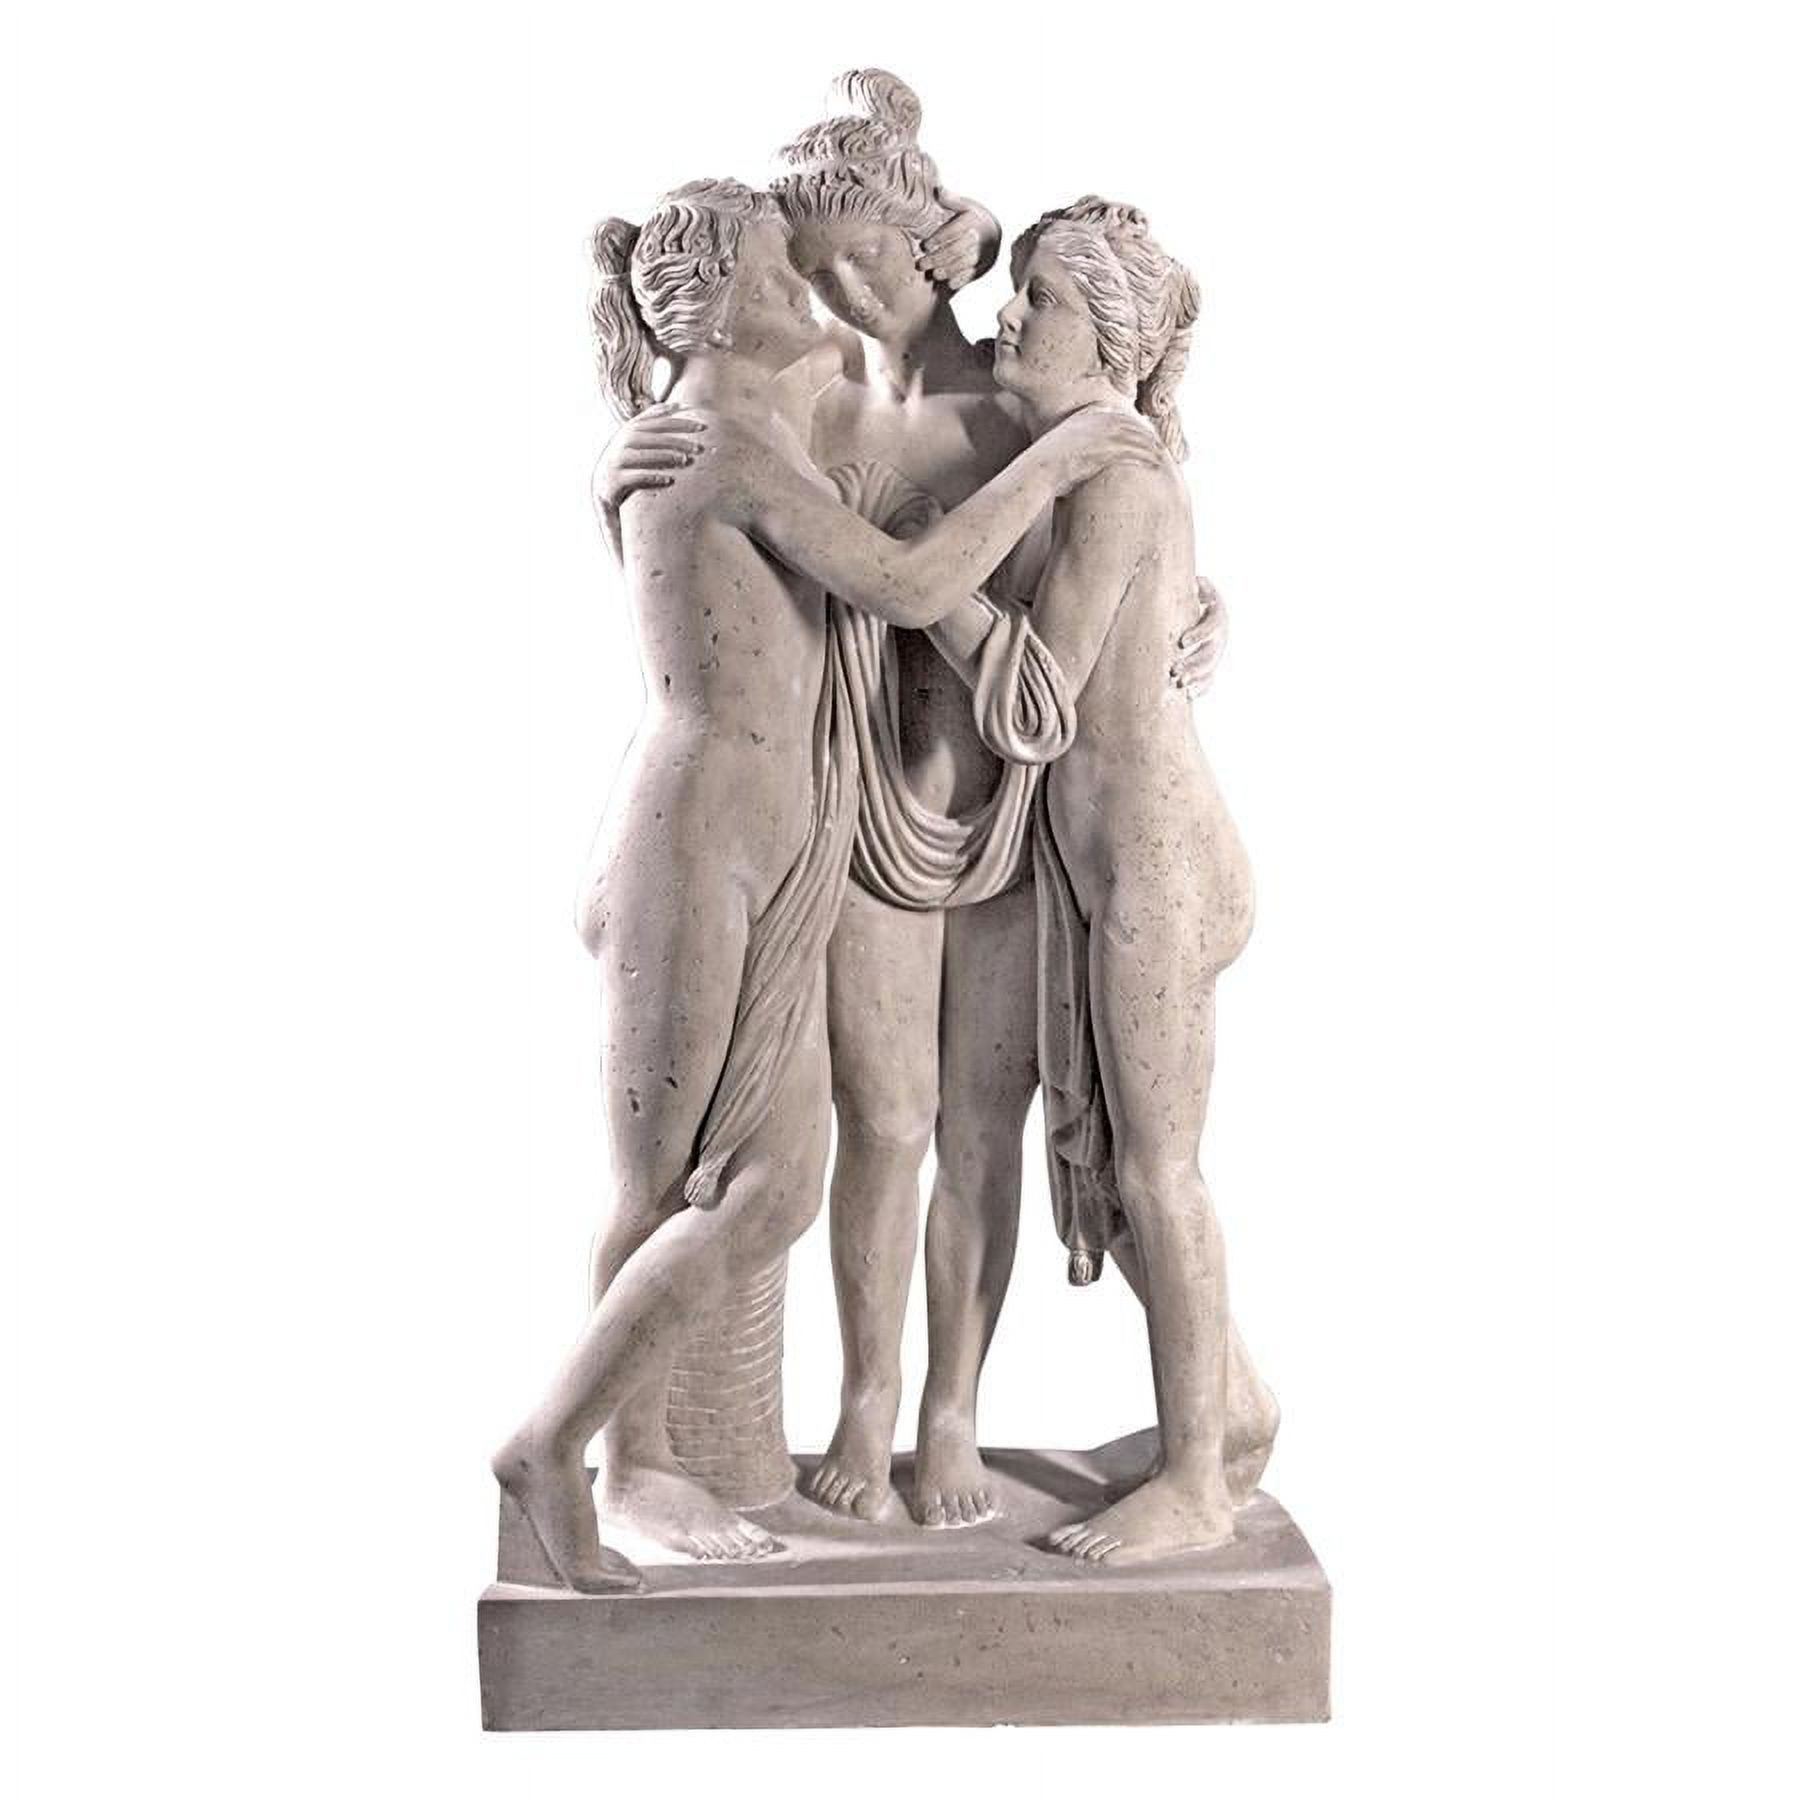 Design Toscano the Three Graces Statue: Large - image 1 of 6